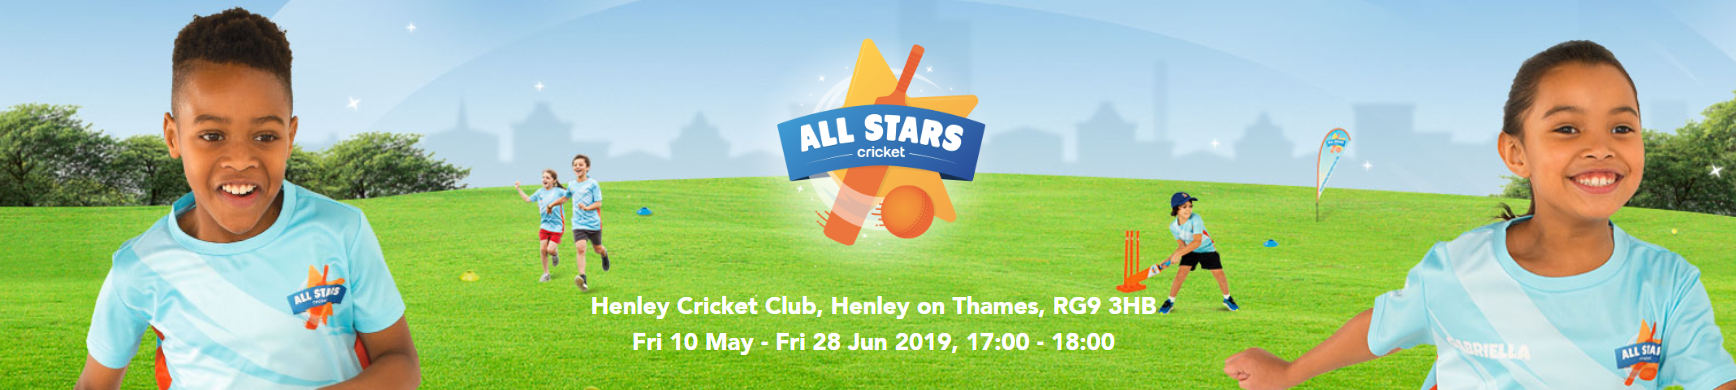 All Star Cricket Comes to Henley Cricket Club